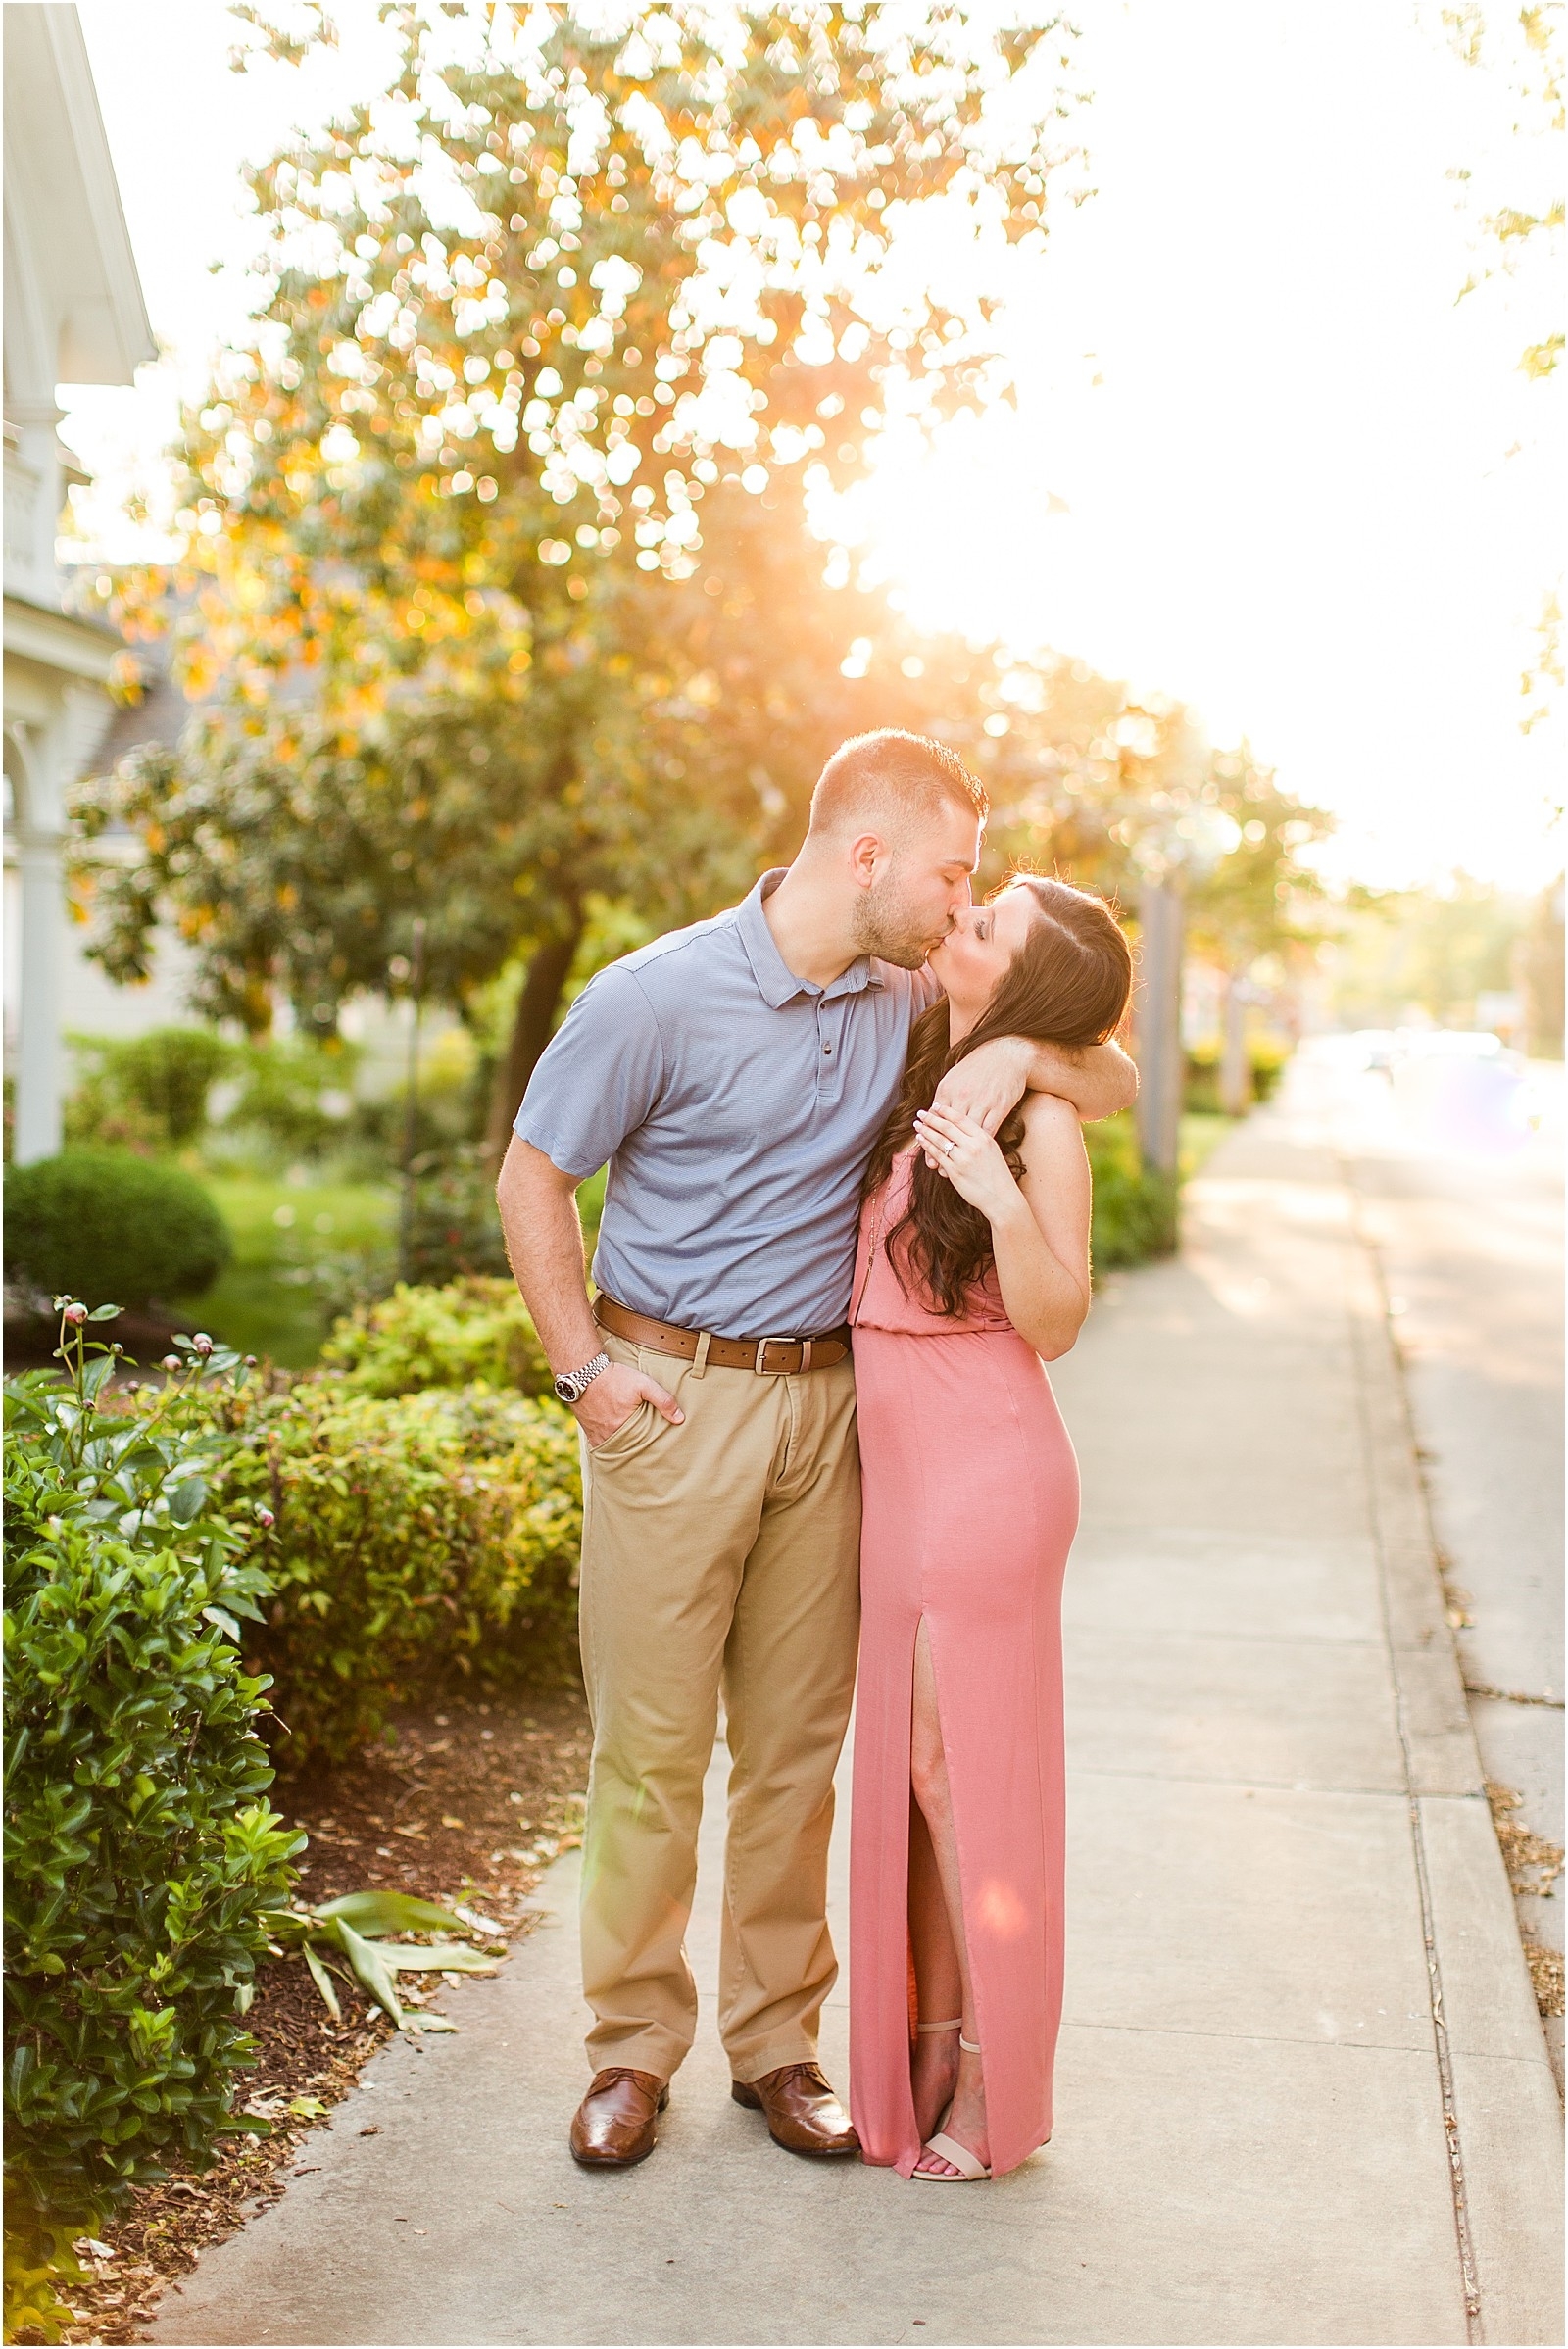 The Best of Engagement Sessions 2020 Recap0048.jpg